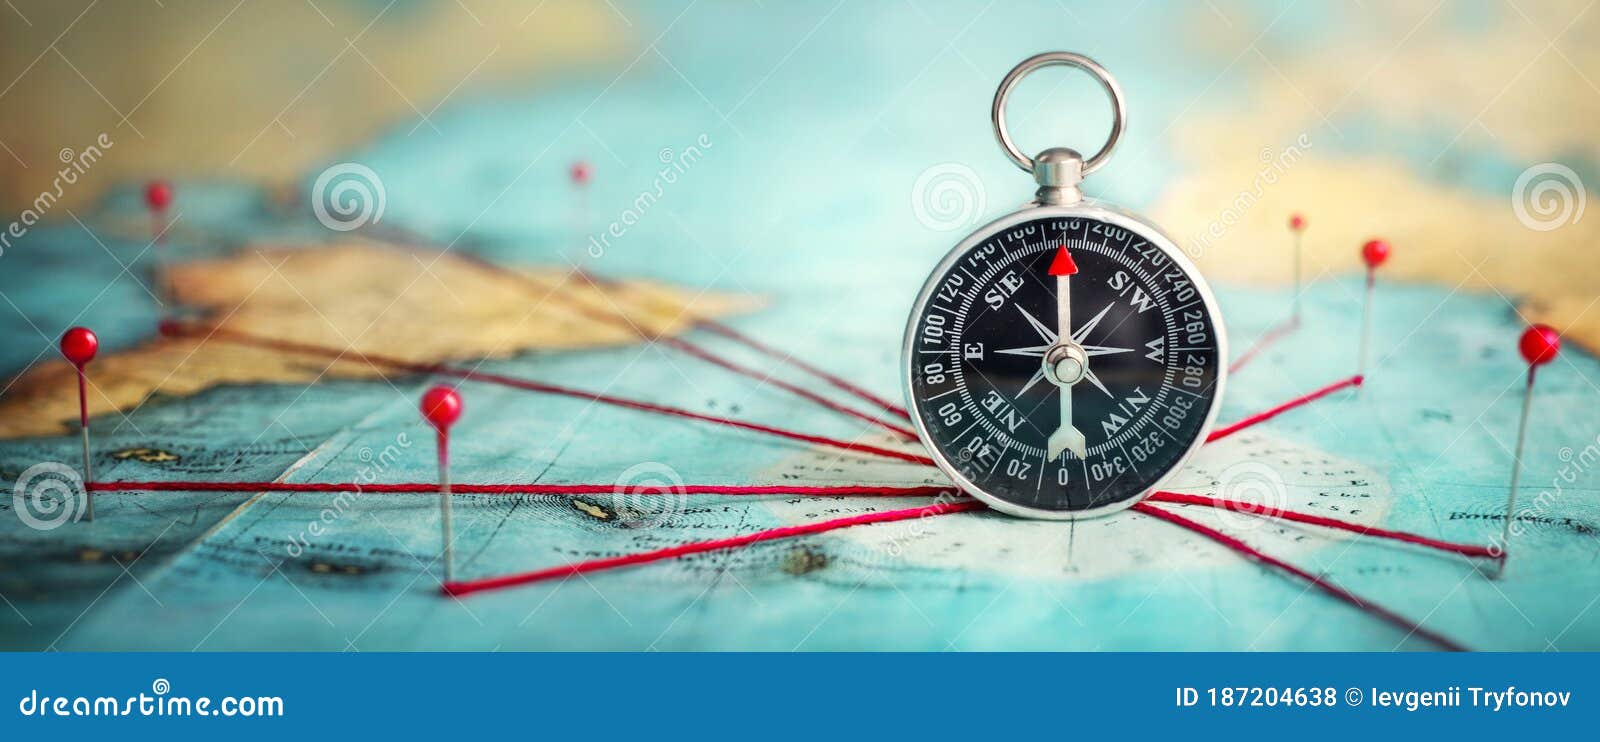 magnetic compass  and location marking with a pin on routes on world map. adventure, discovery, navigation, communication,